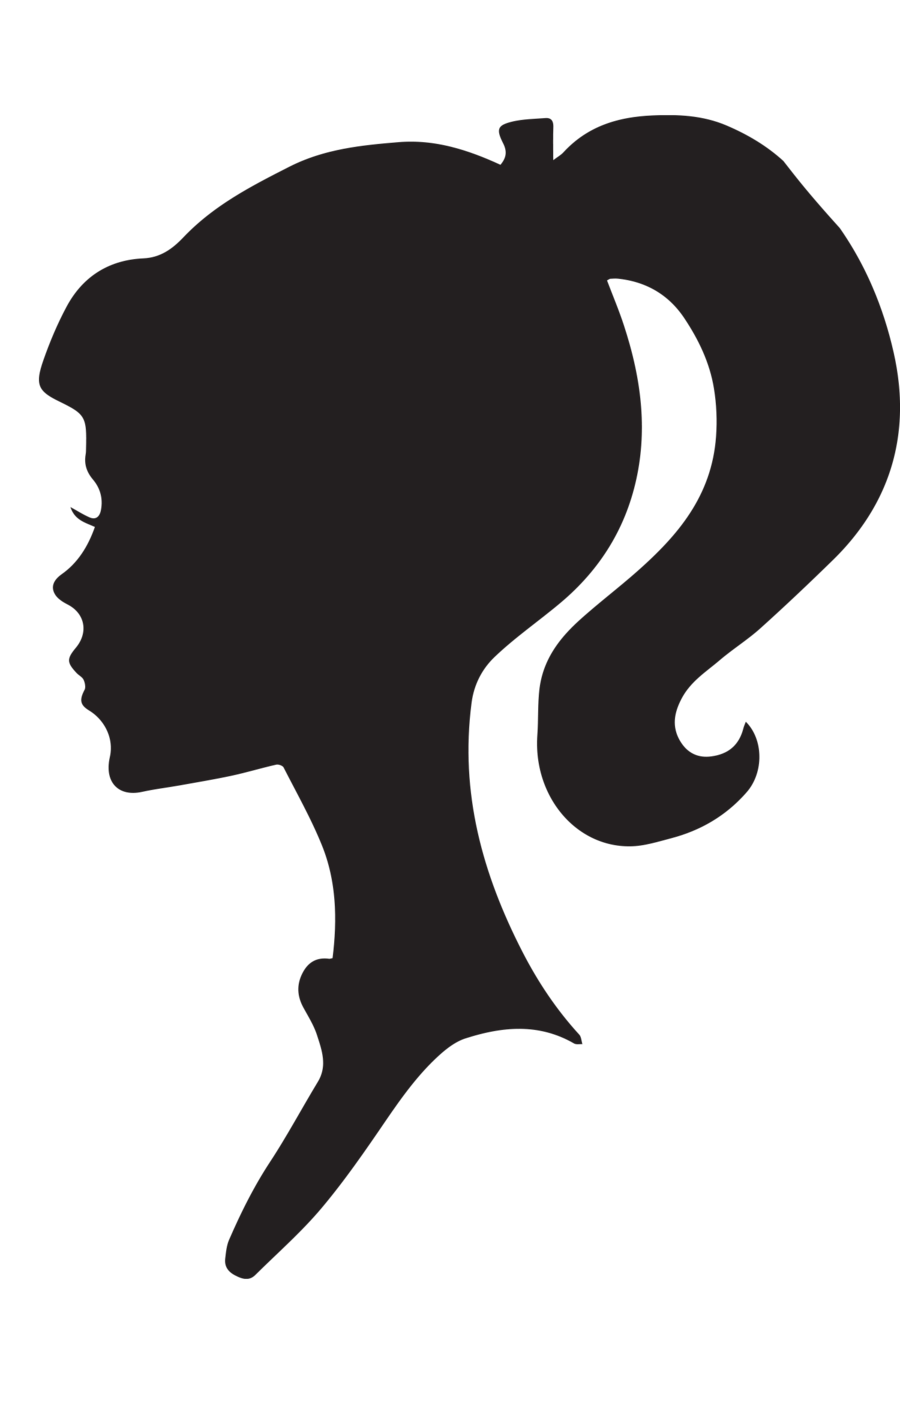 Vampire clipart silhouette. Female side at getdrawings